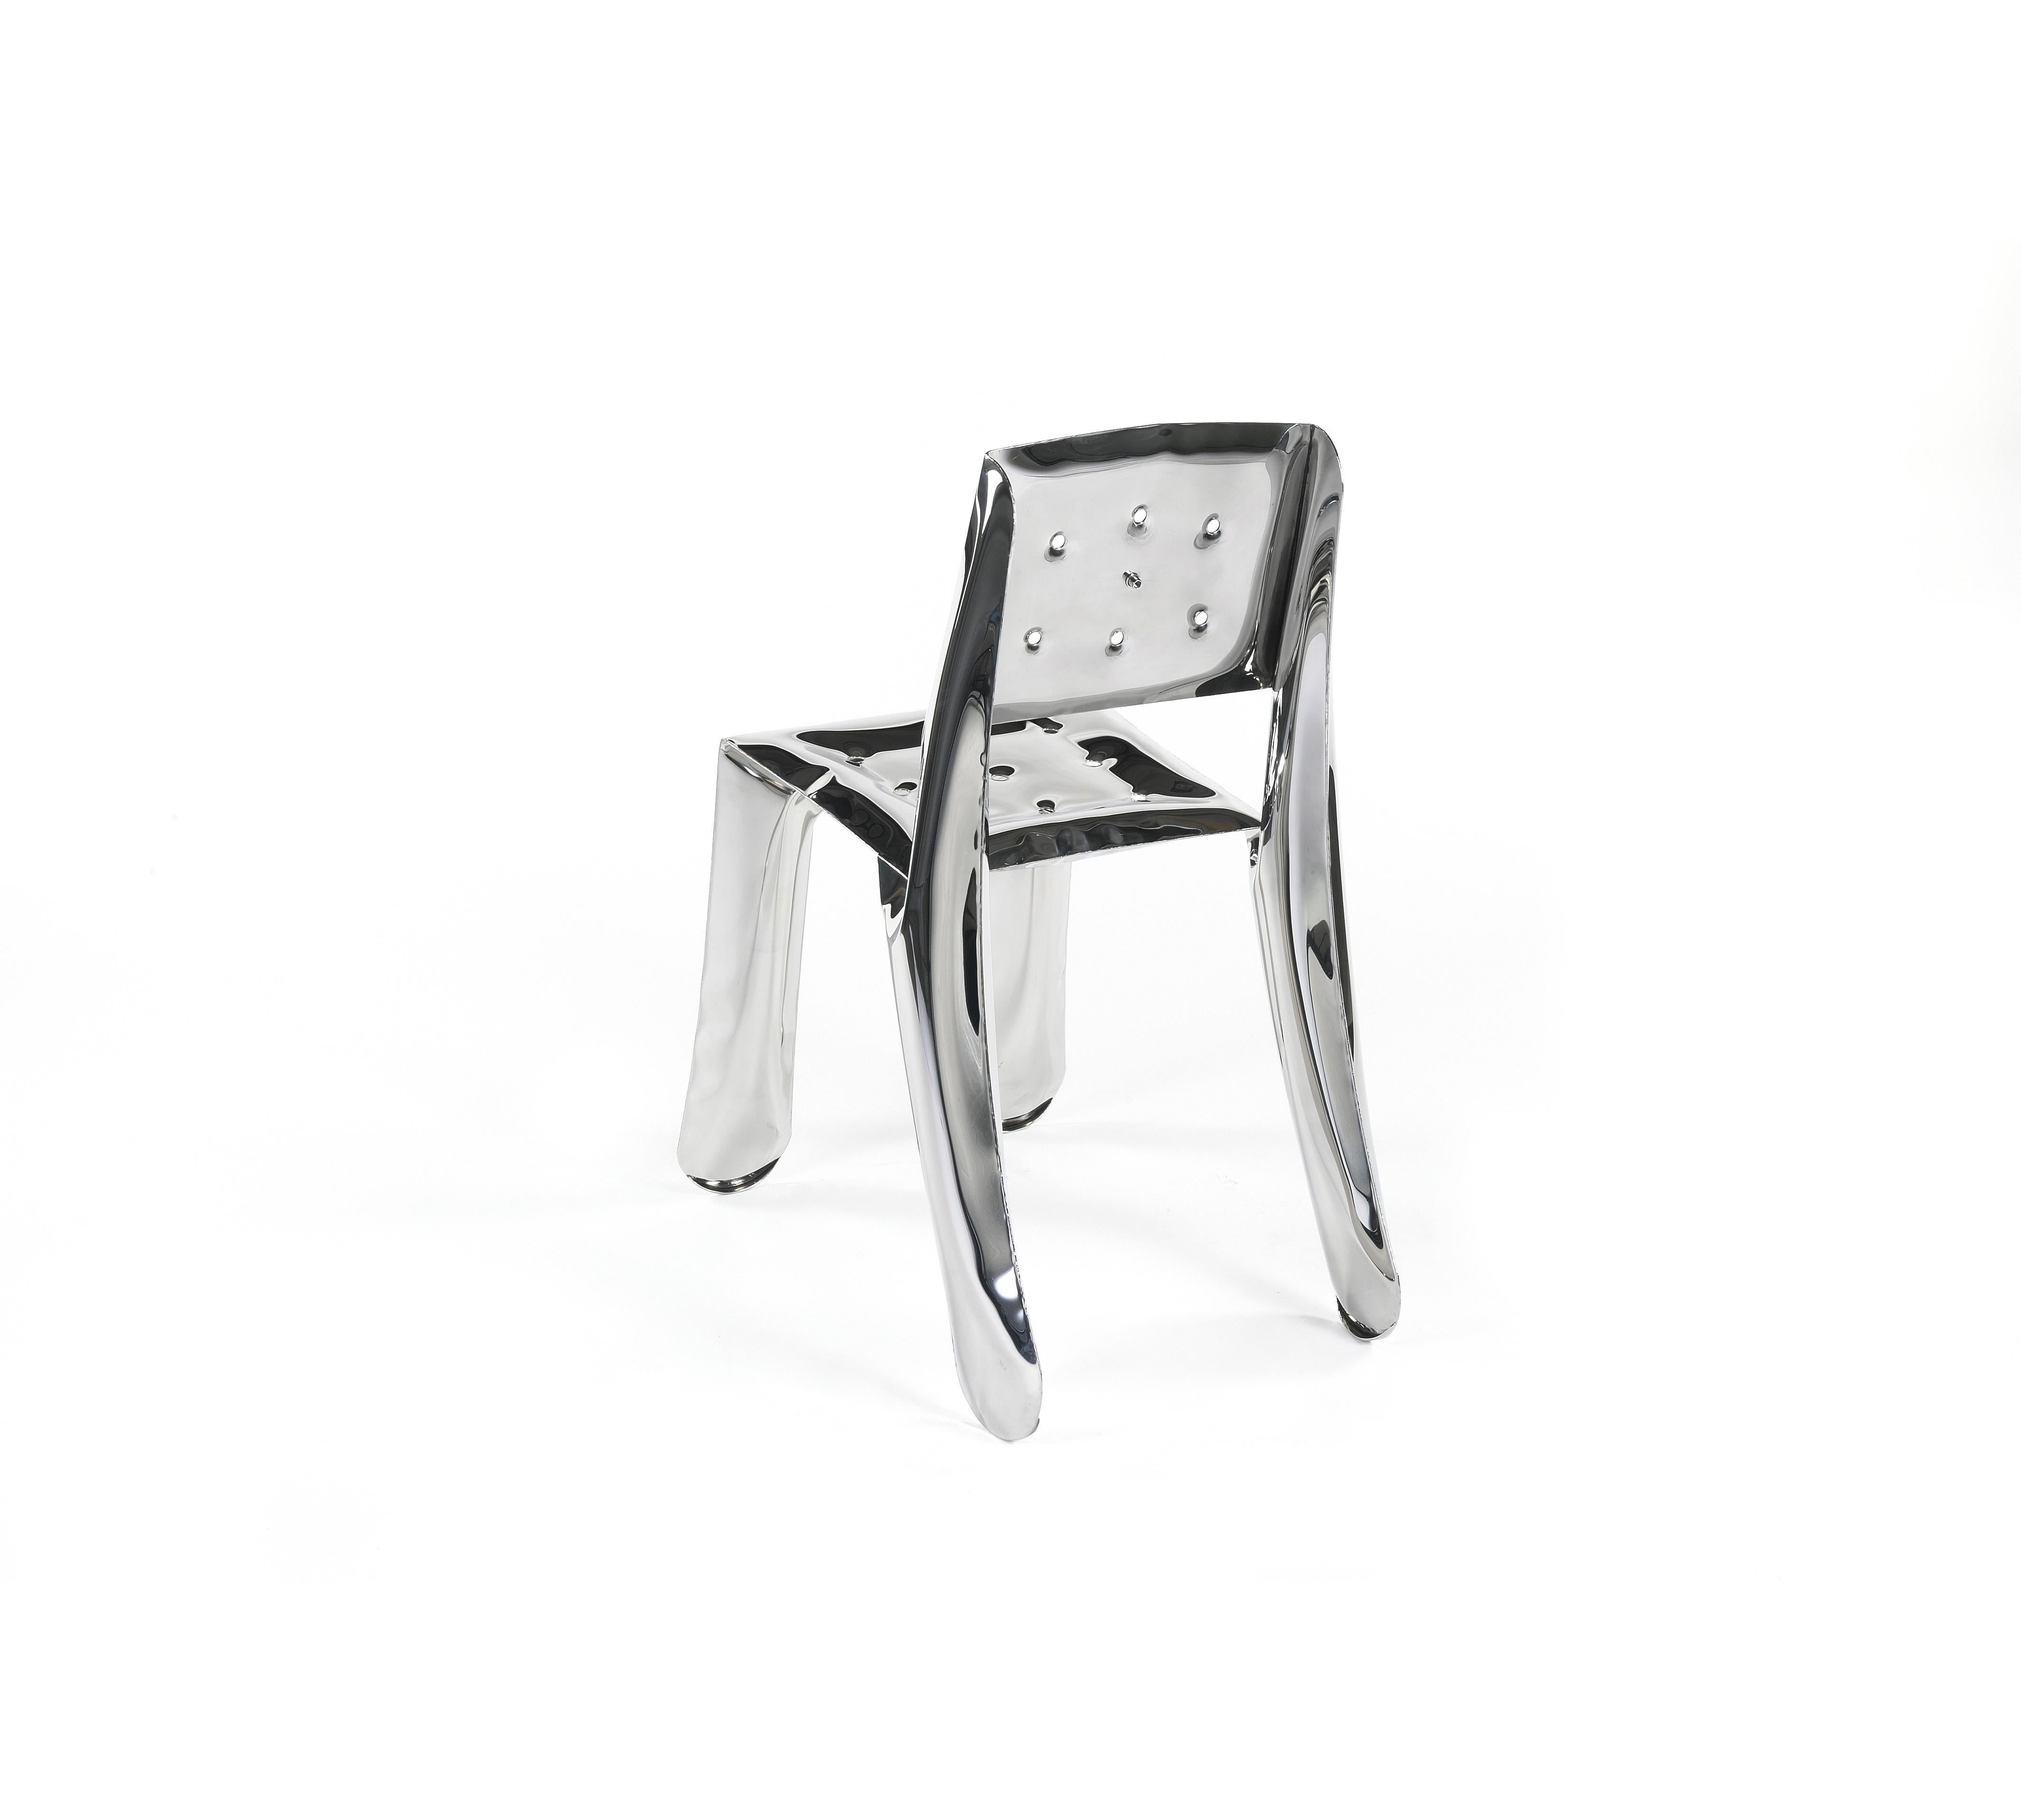 Polished Stainless Steel Chippensteel 0.5 Sculptural Chair by Zieta